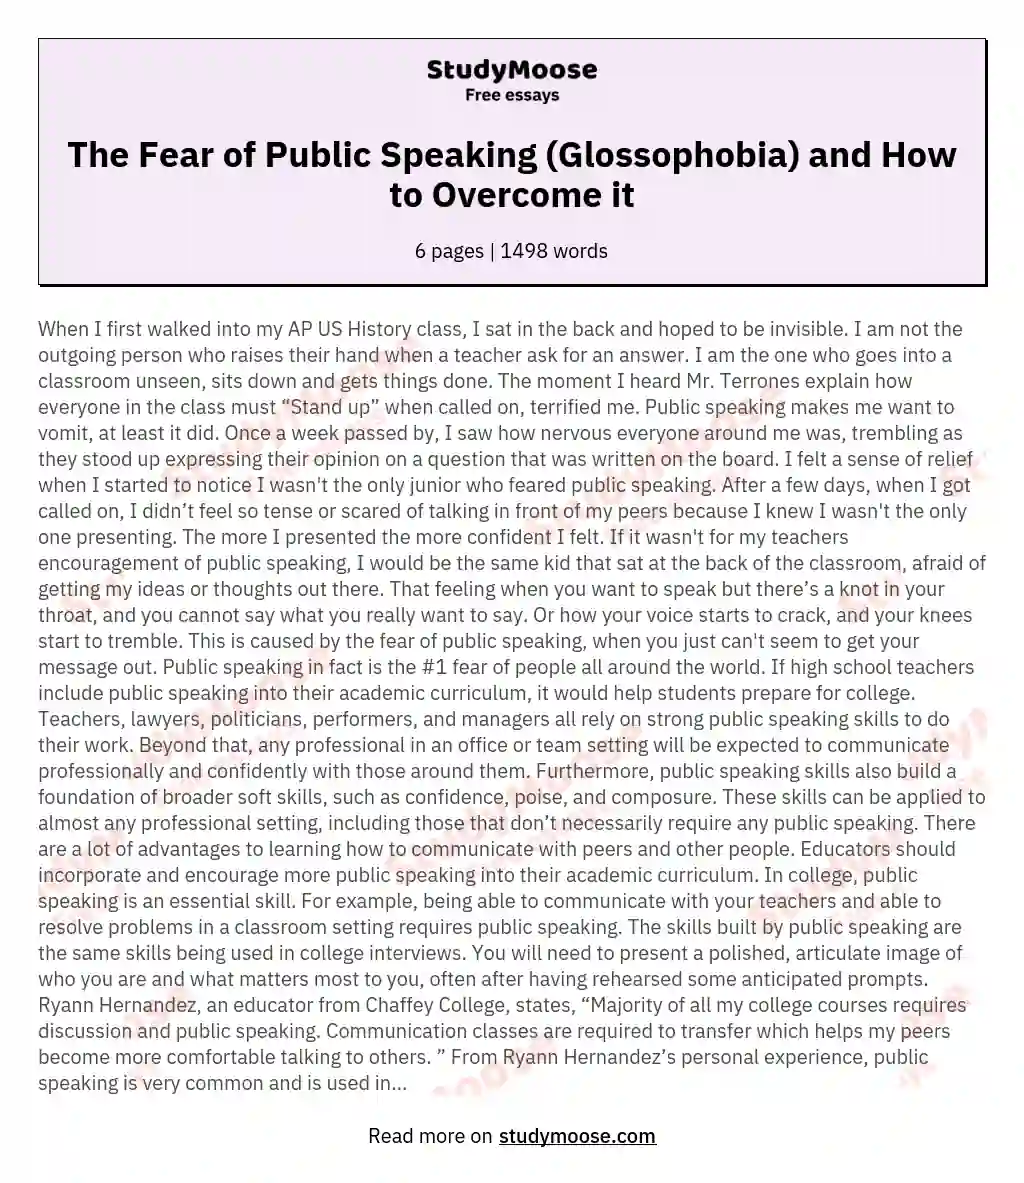 The Fear of Public Speaking (Glossophobia) and How to Overcome it essay